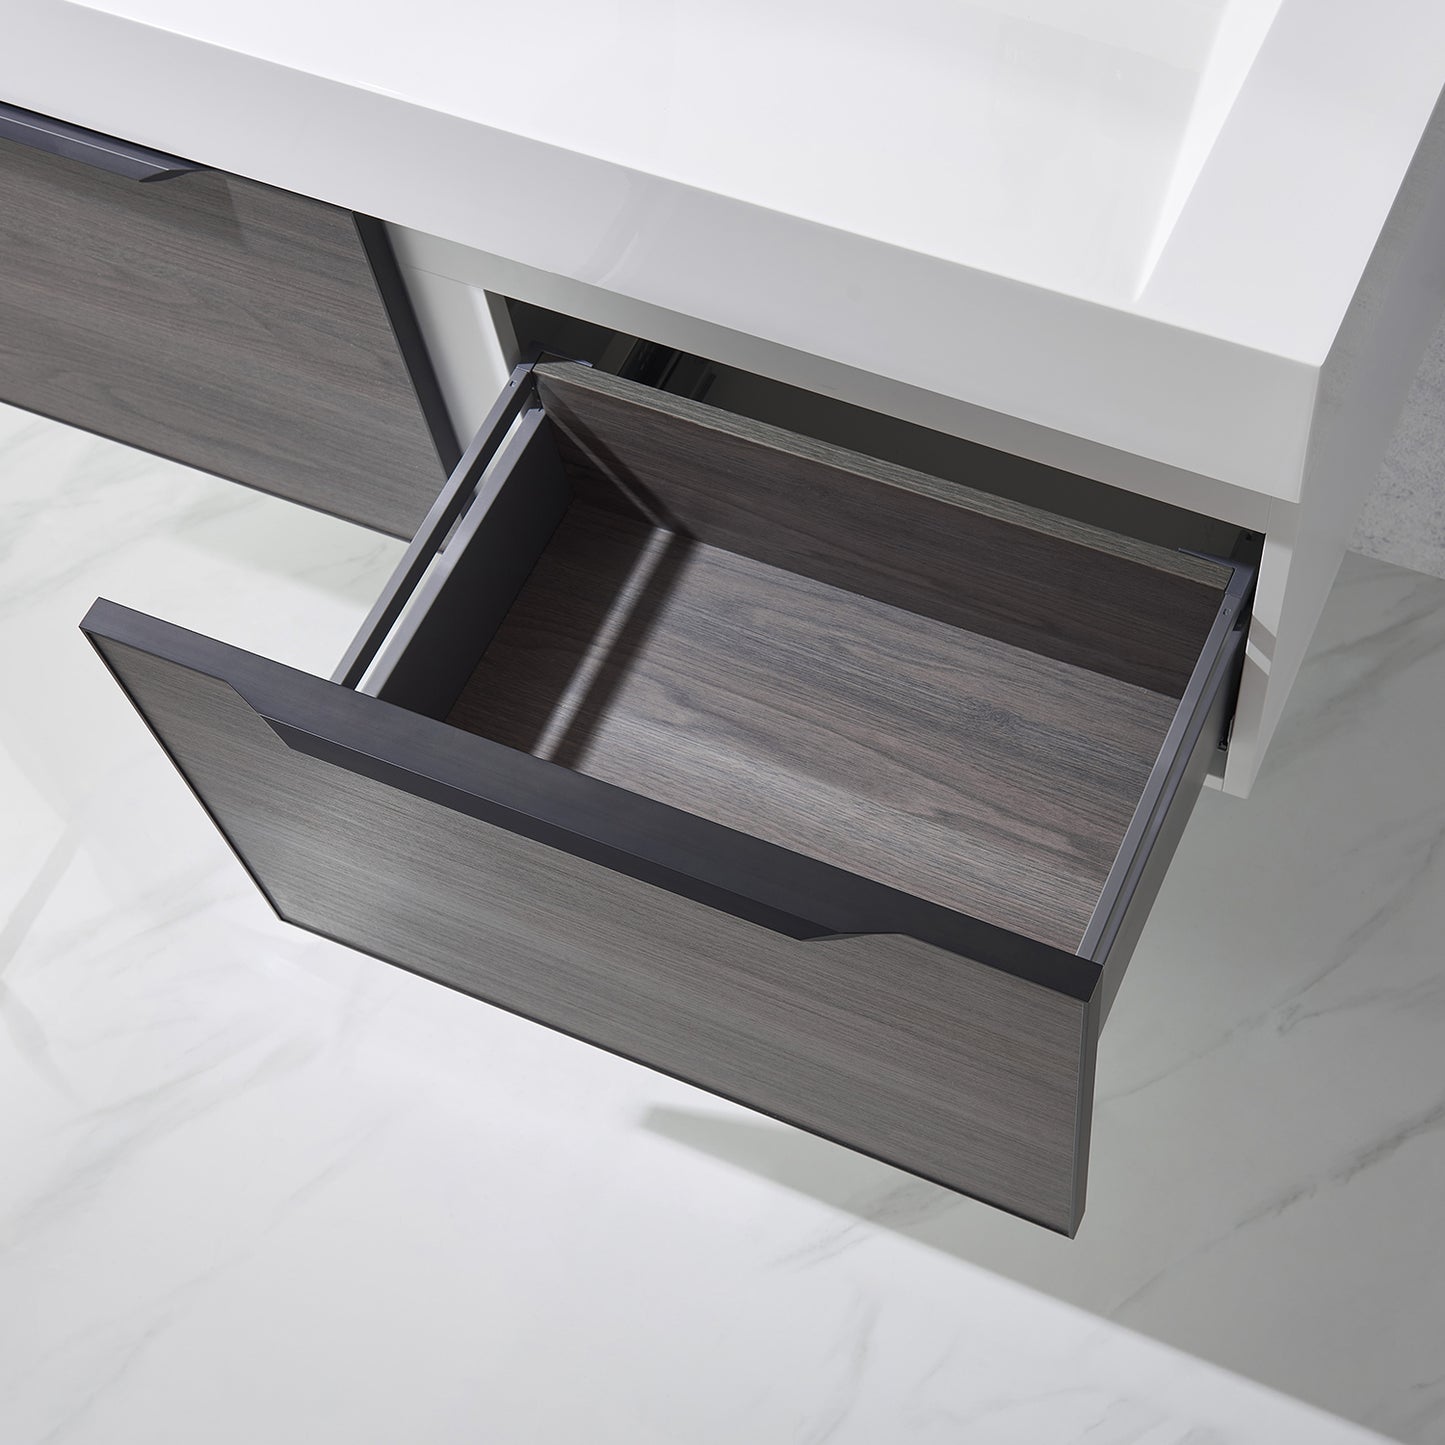 Vegadeo 48" Single Sink Bath Vanity in Suleiman Oak with White One-Piece Composite Stone Sink Top